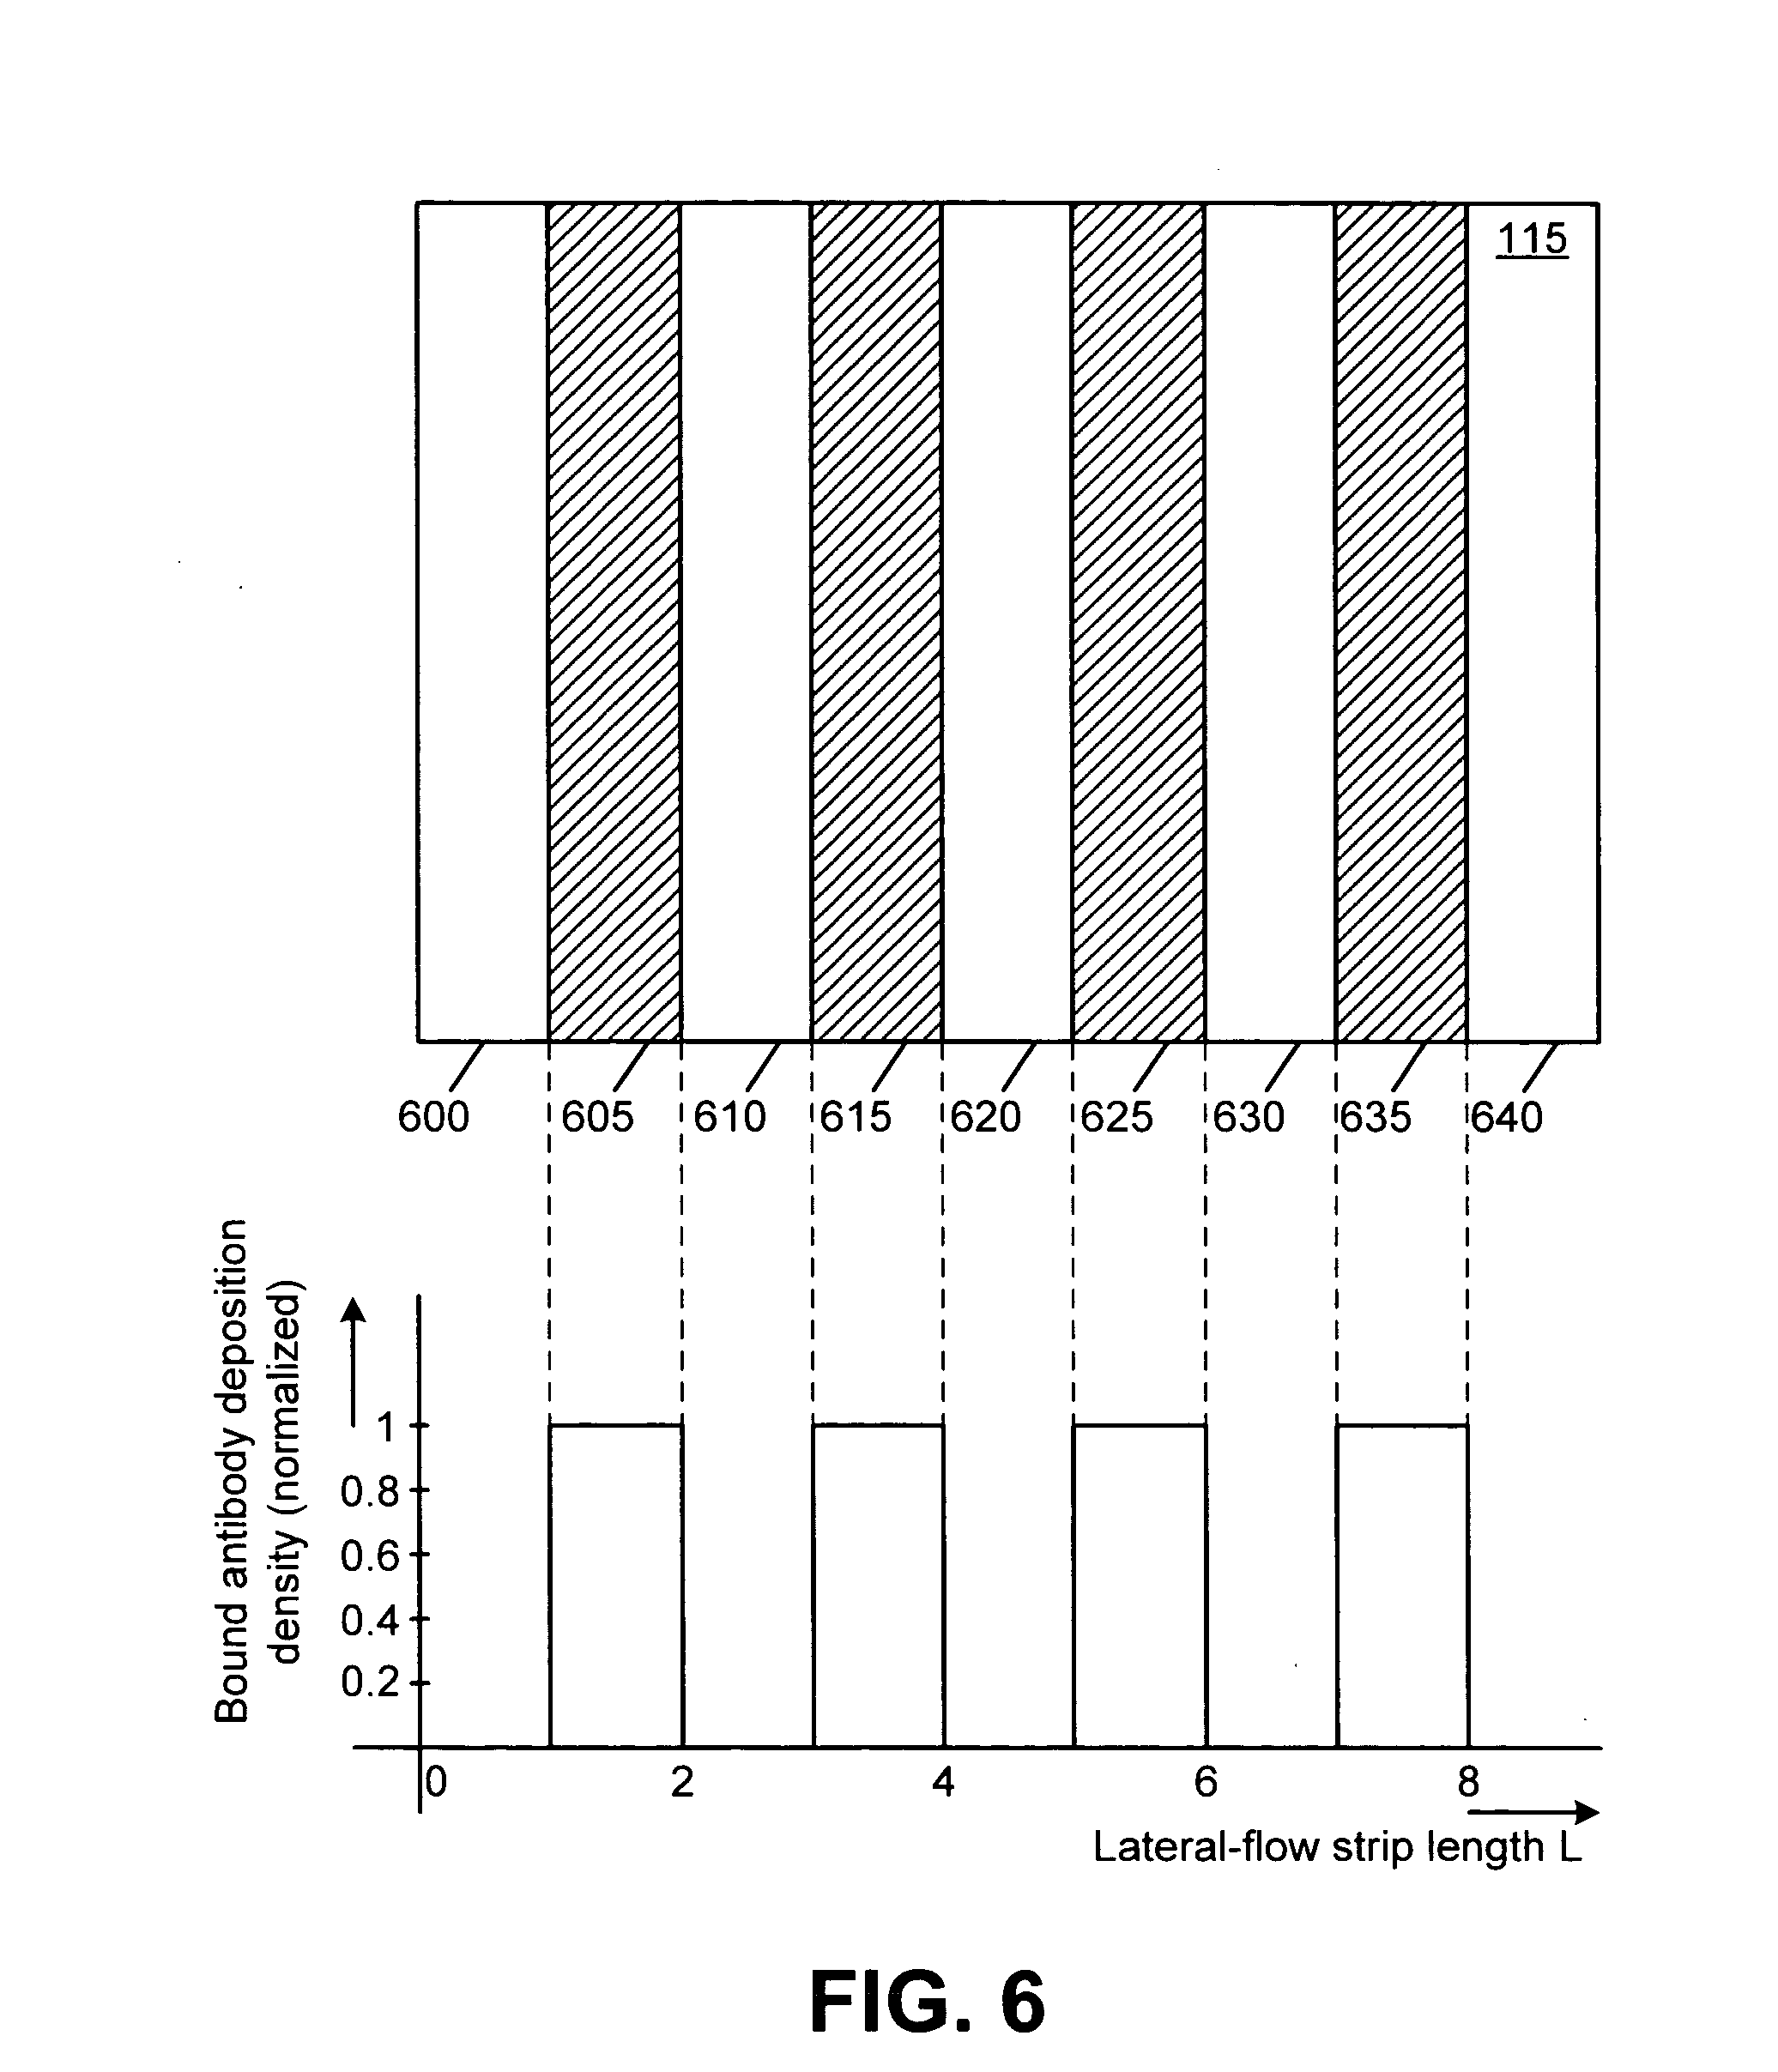 Rapid diagnostic test systems and methods